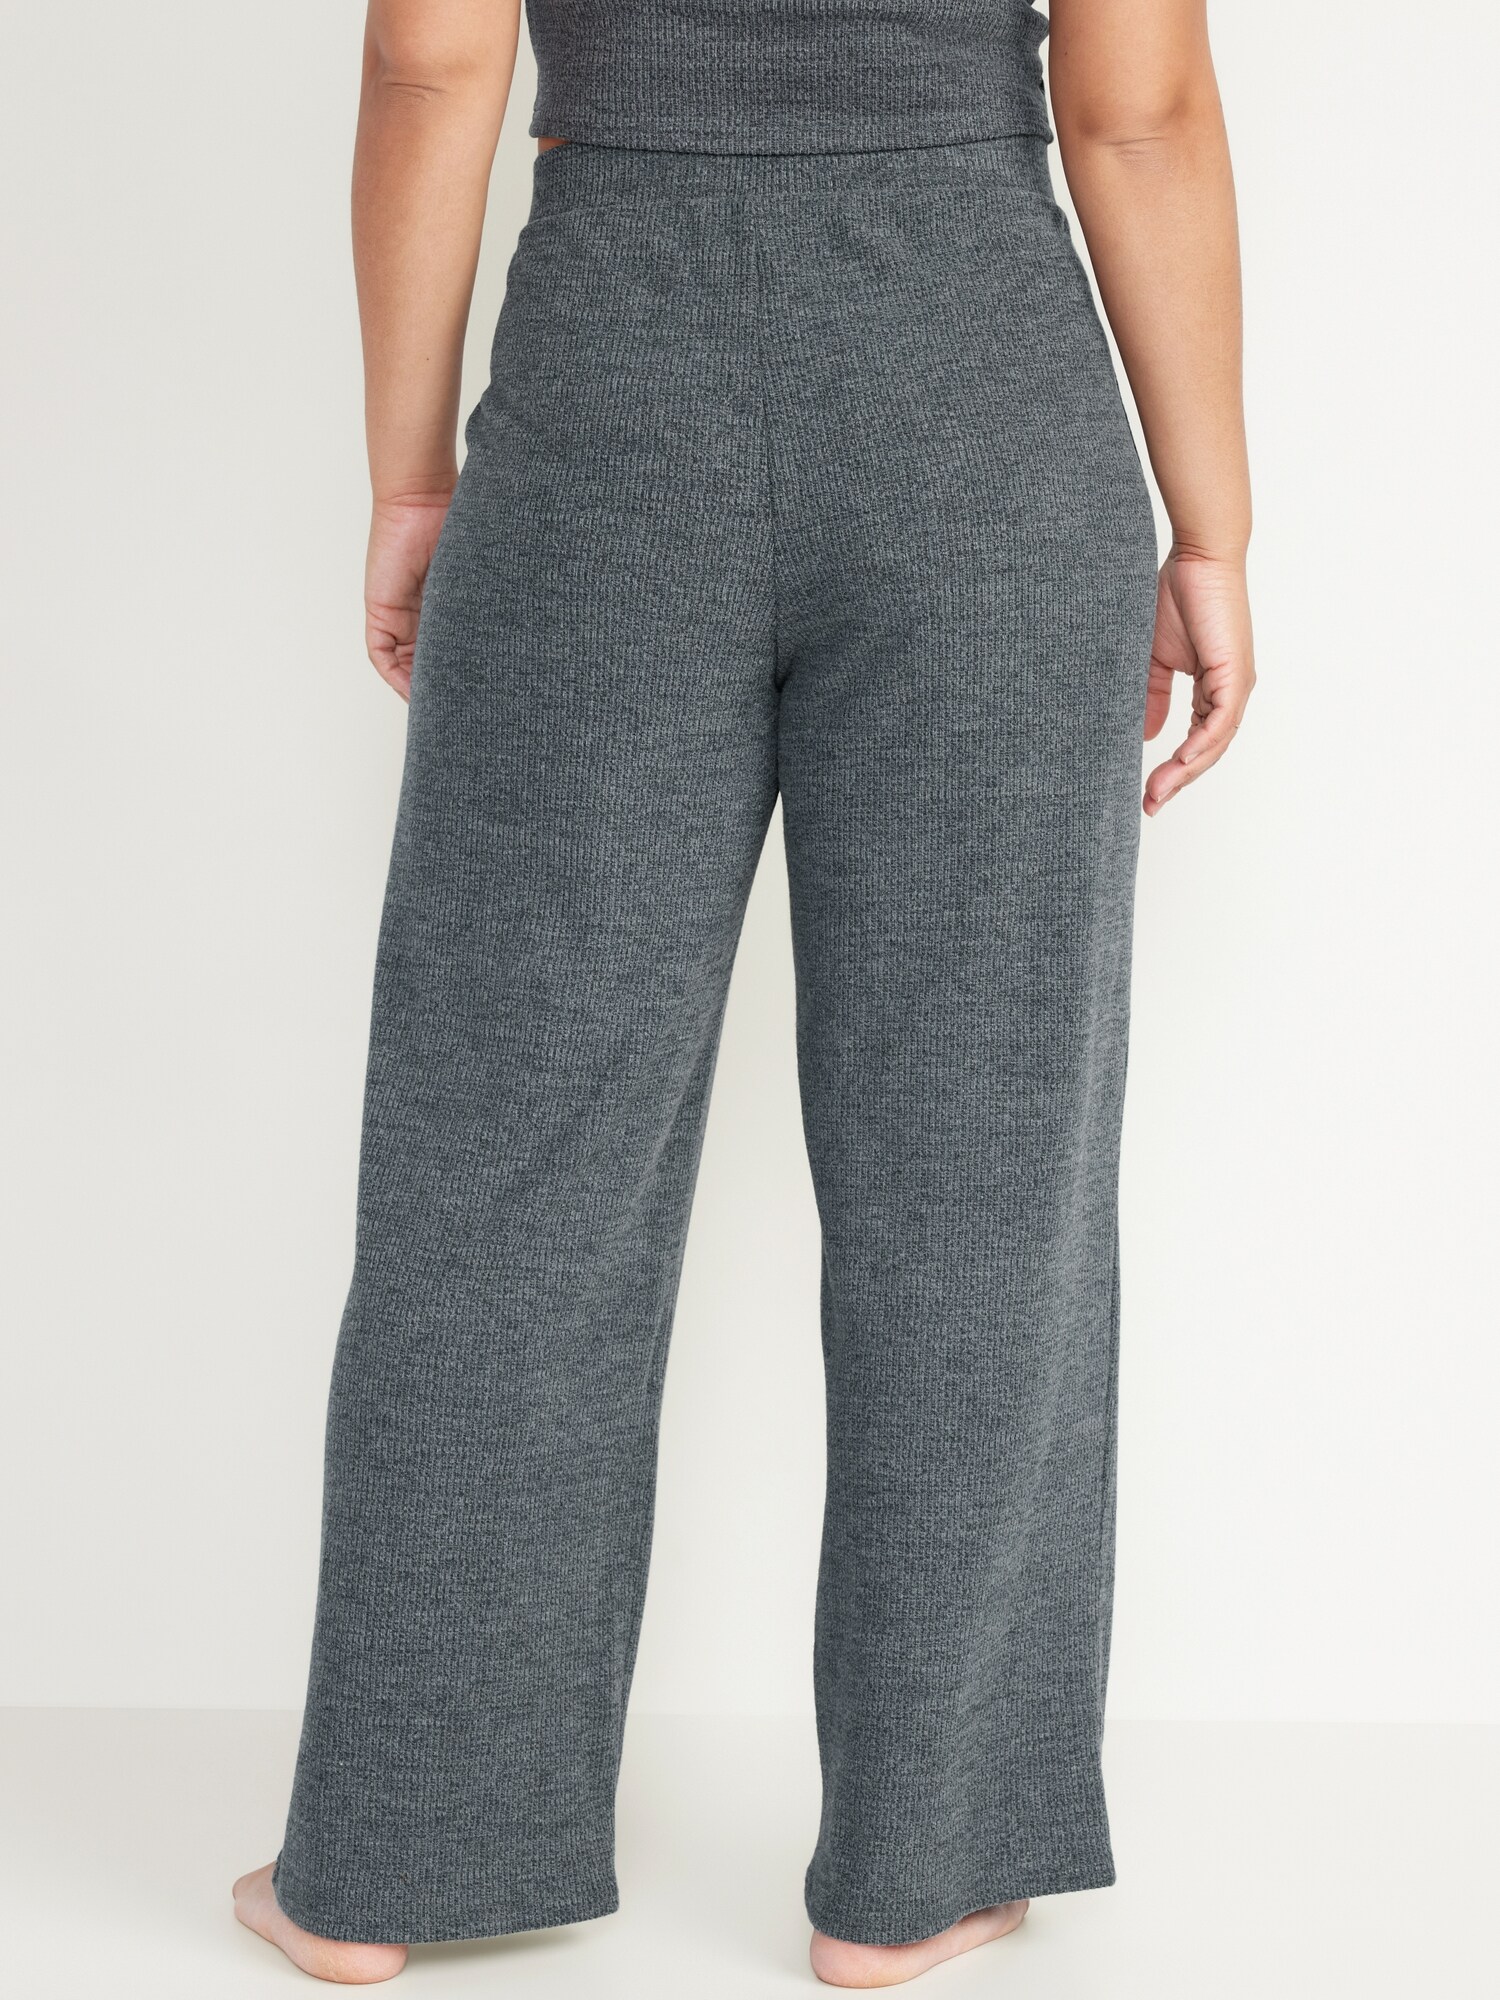 Sweater Knit Straight Leg Pants With Front Tie - Heather Charcoal